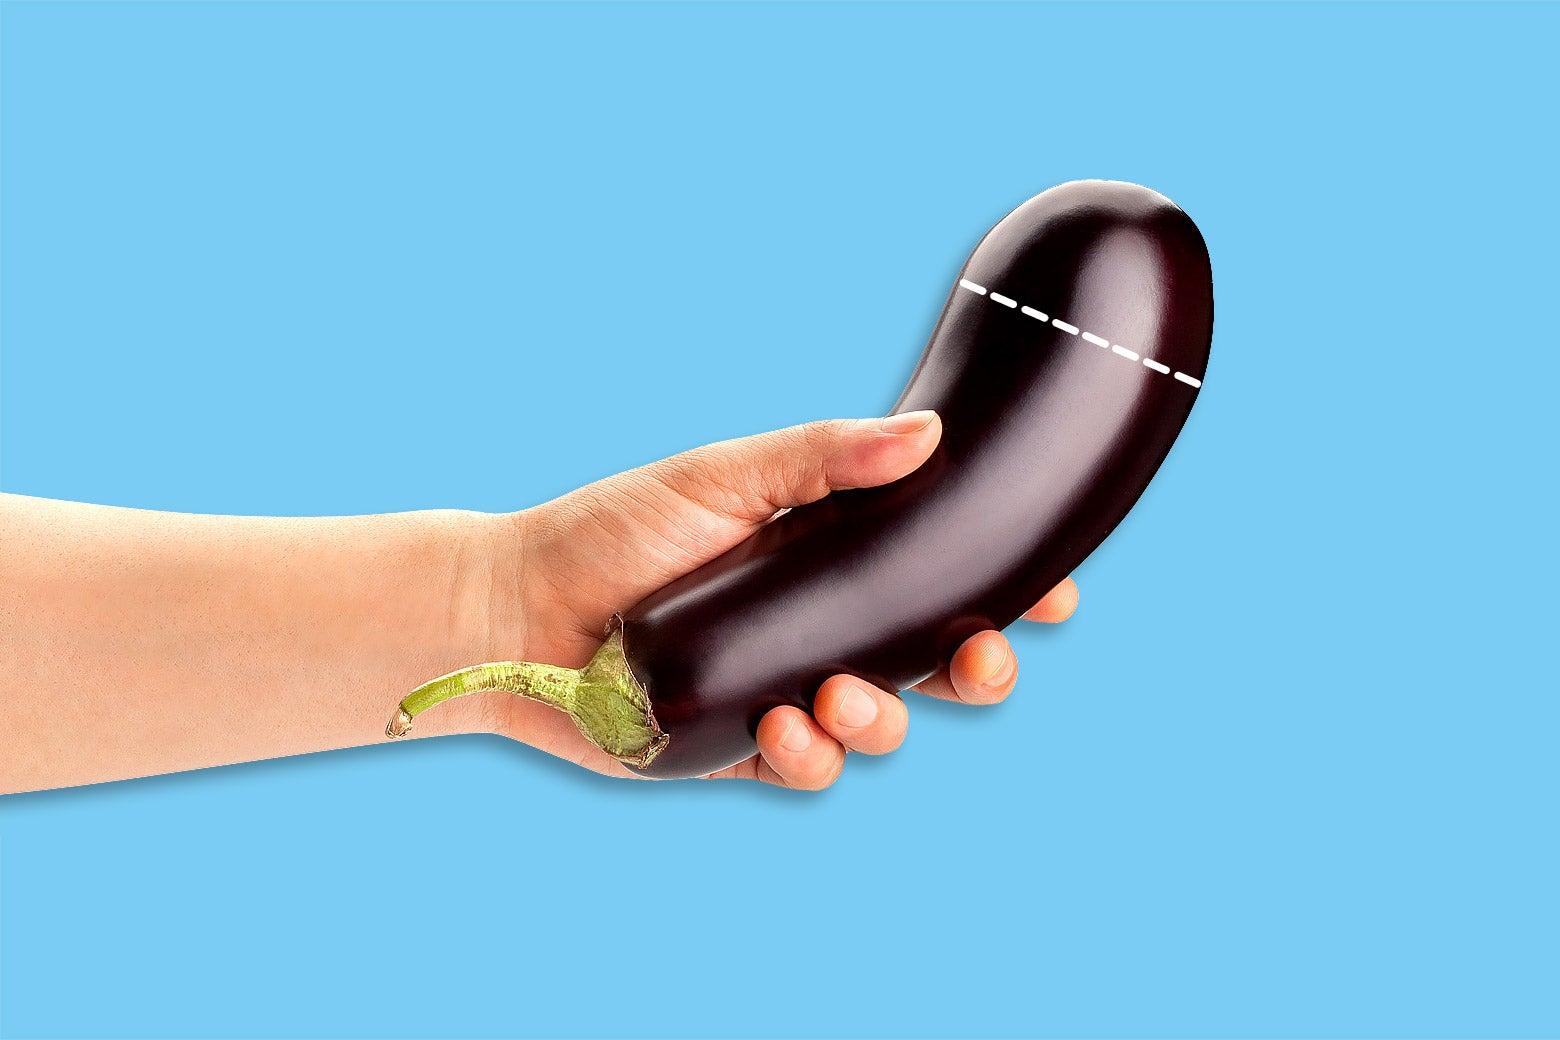 A hand holding an eggplant with a dotted line drawn near the tip of it.